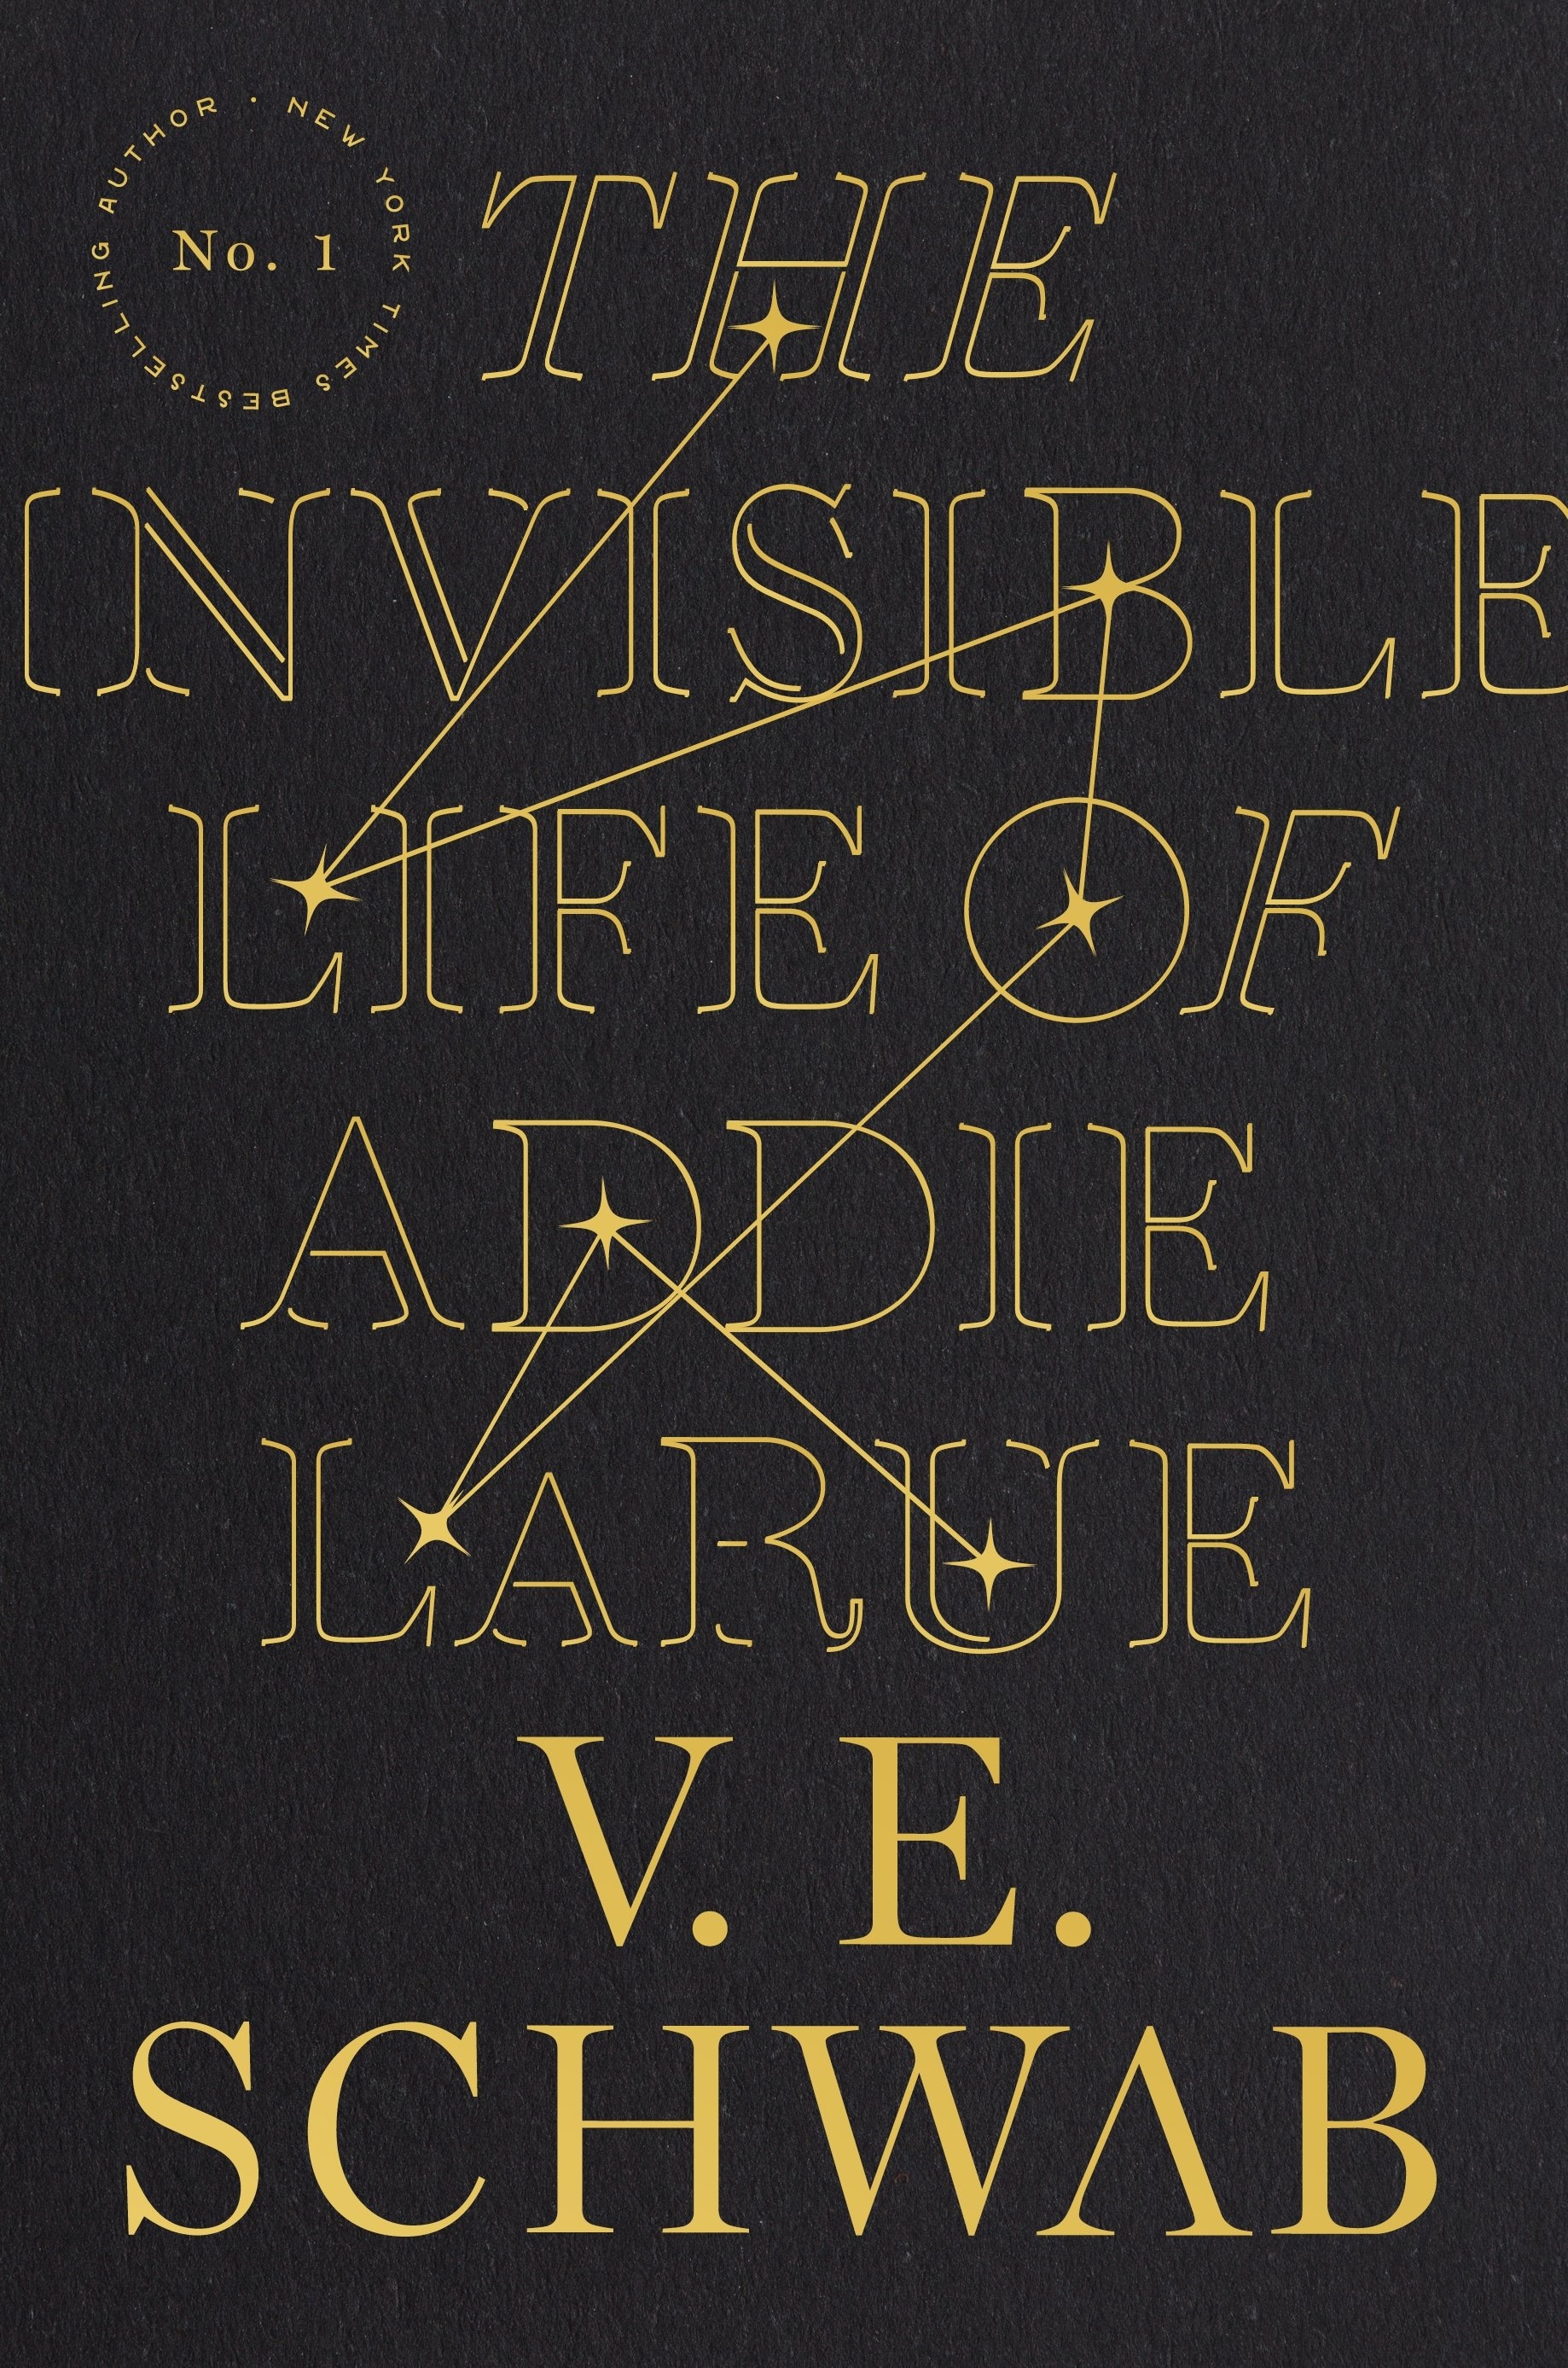 Book “The Invisible Life of Addie LaRue” by V. E. Schwab — October 6, 2020